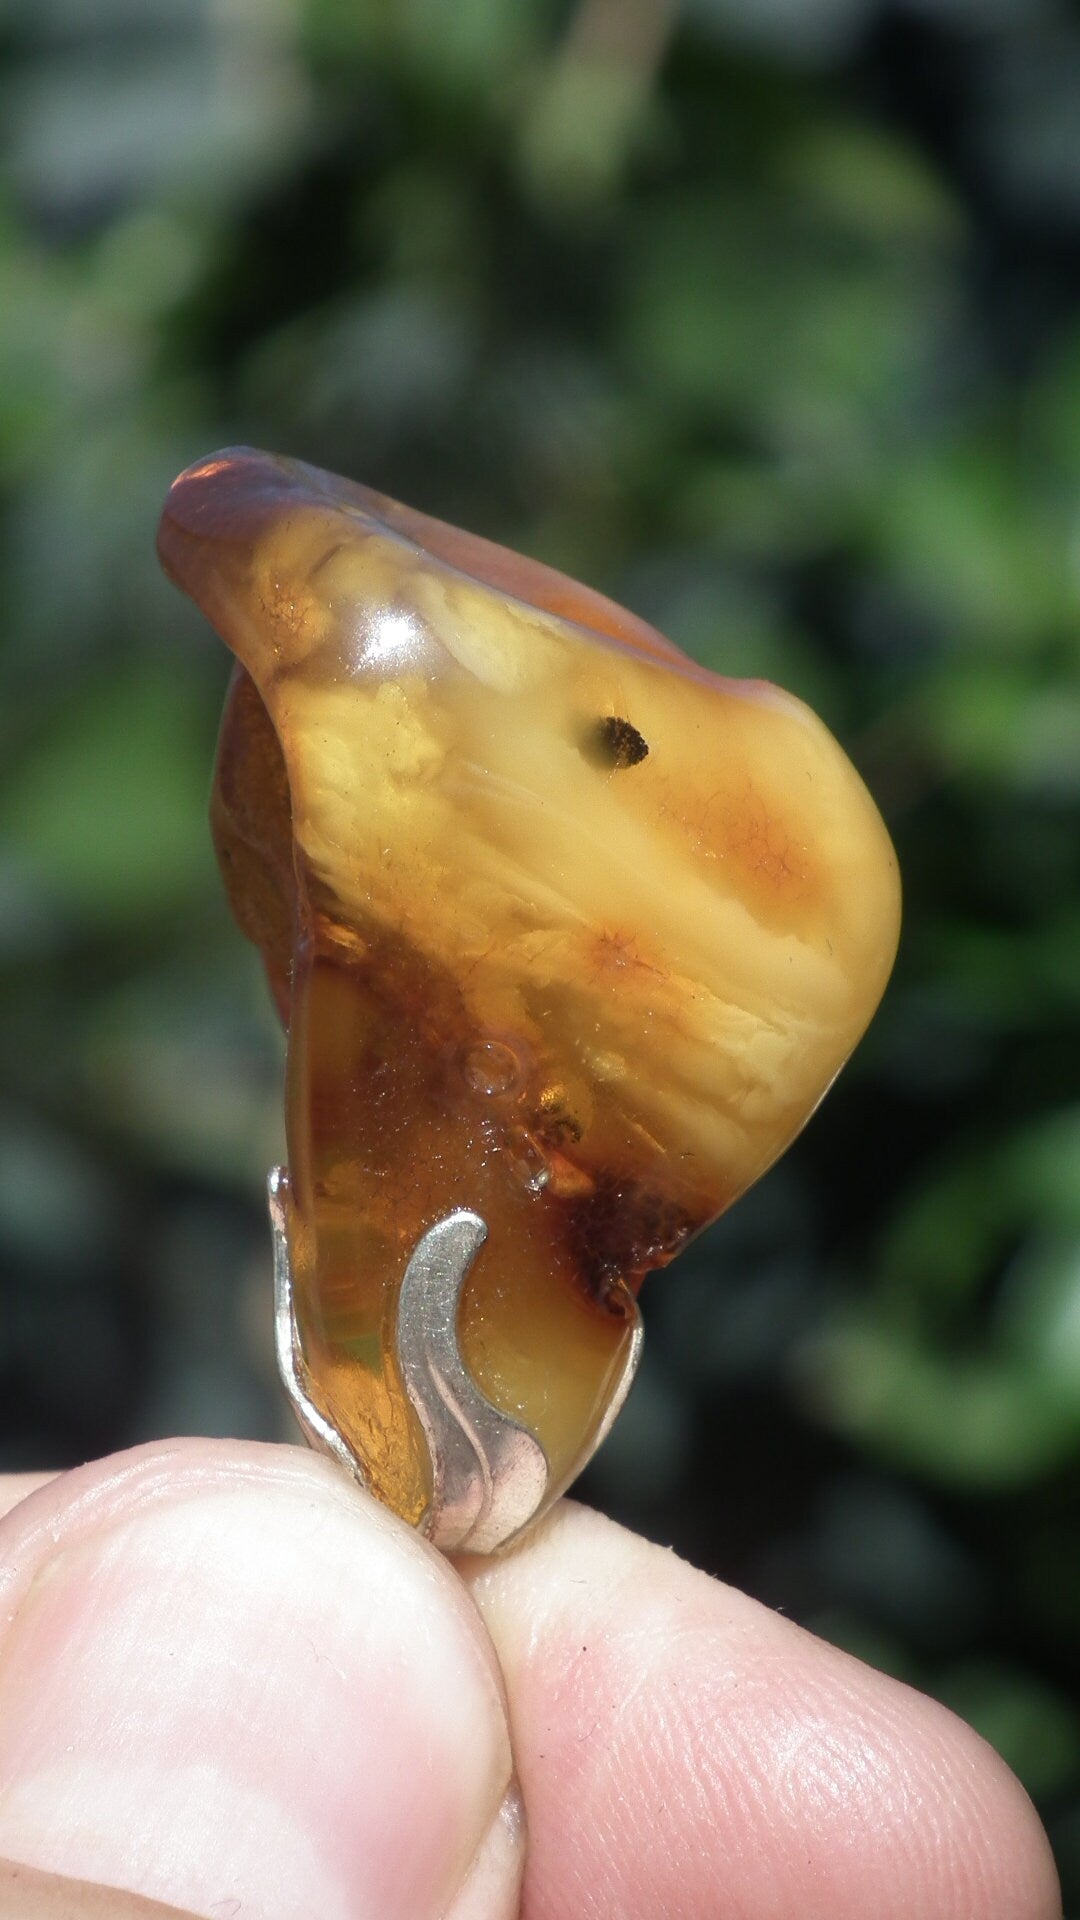 Baltic amber / bernstein pendant with silverplated bel cap